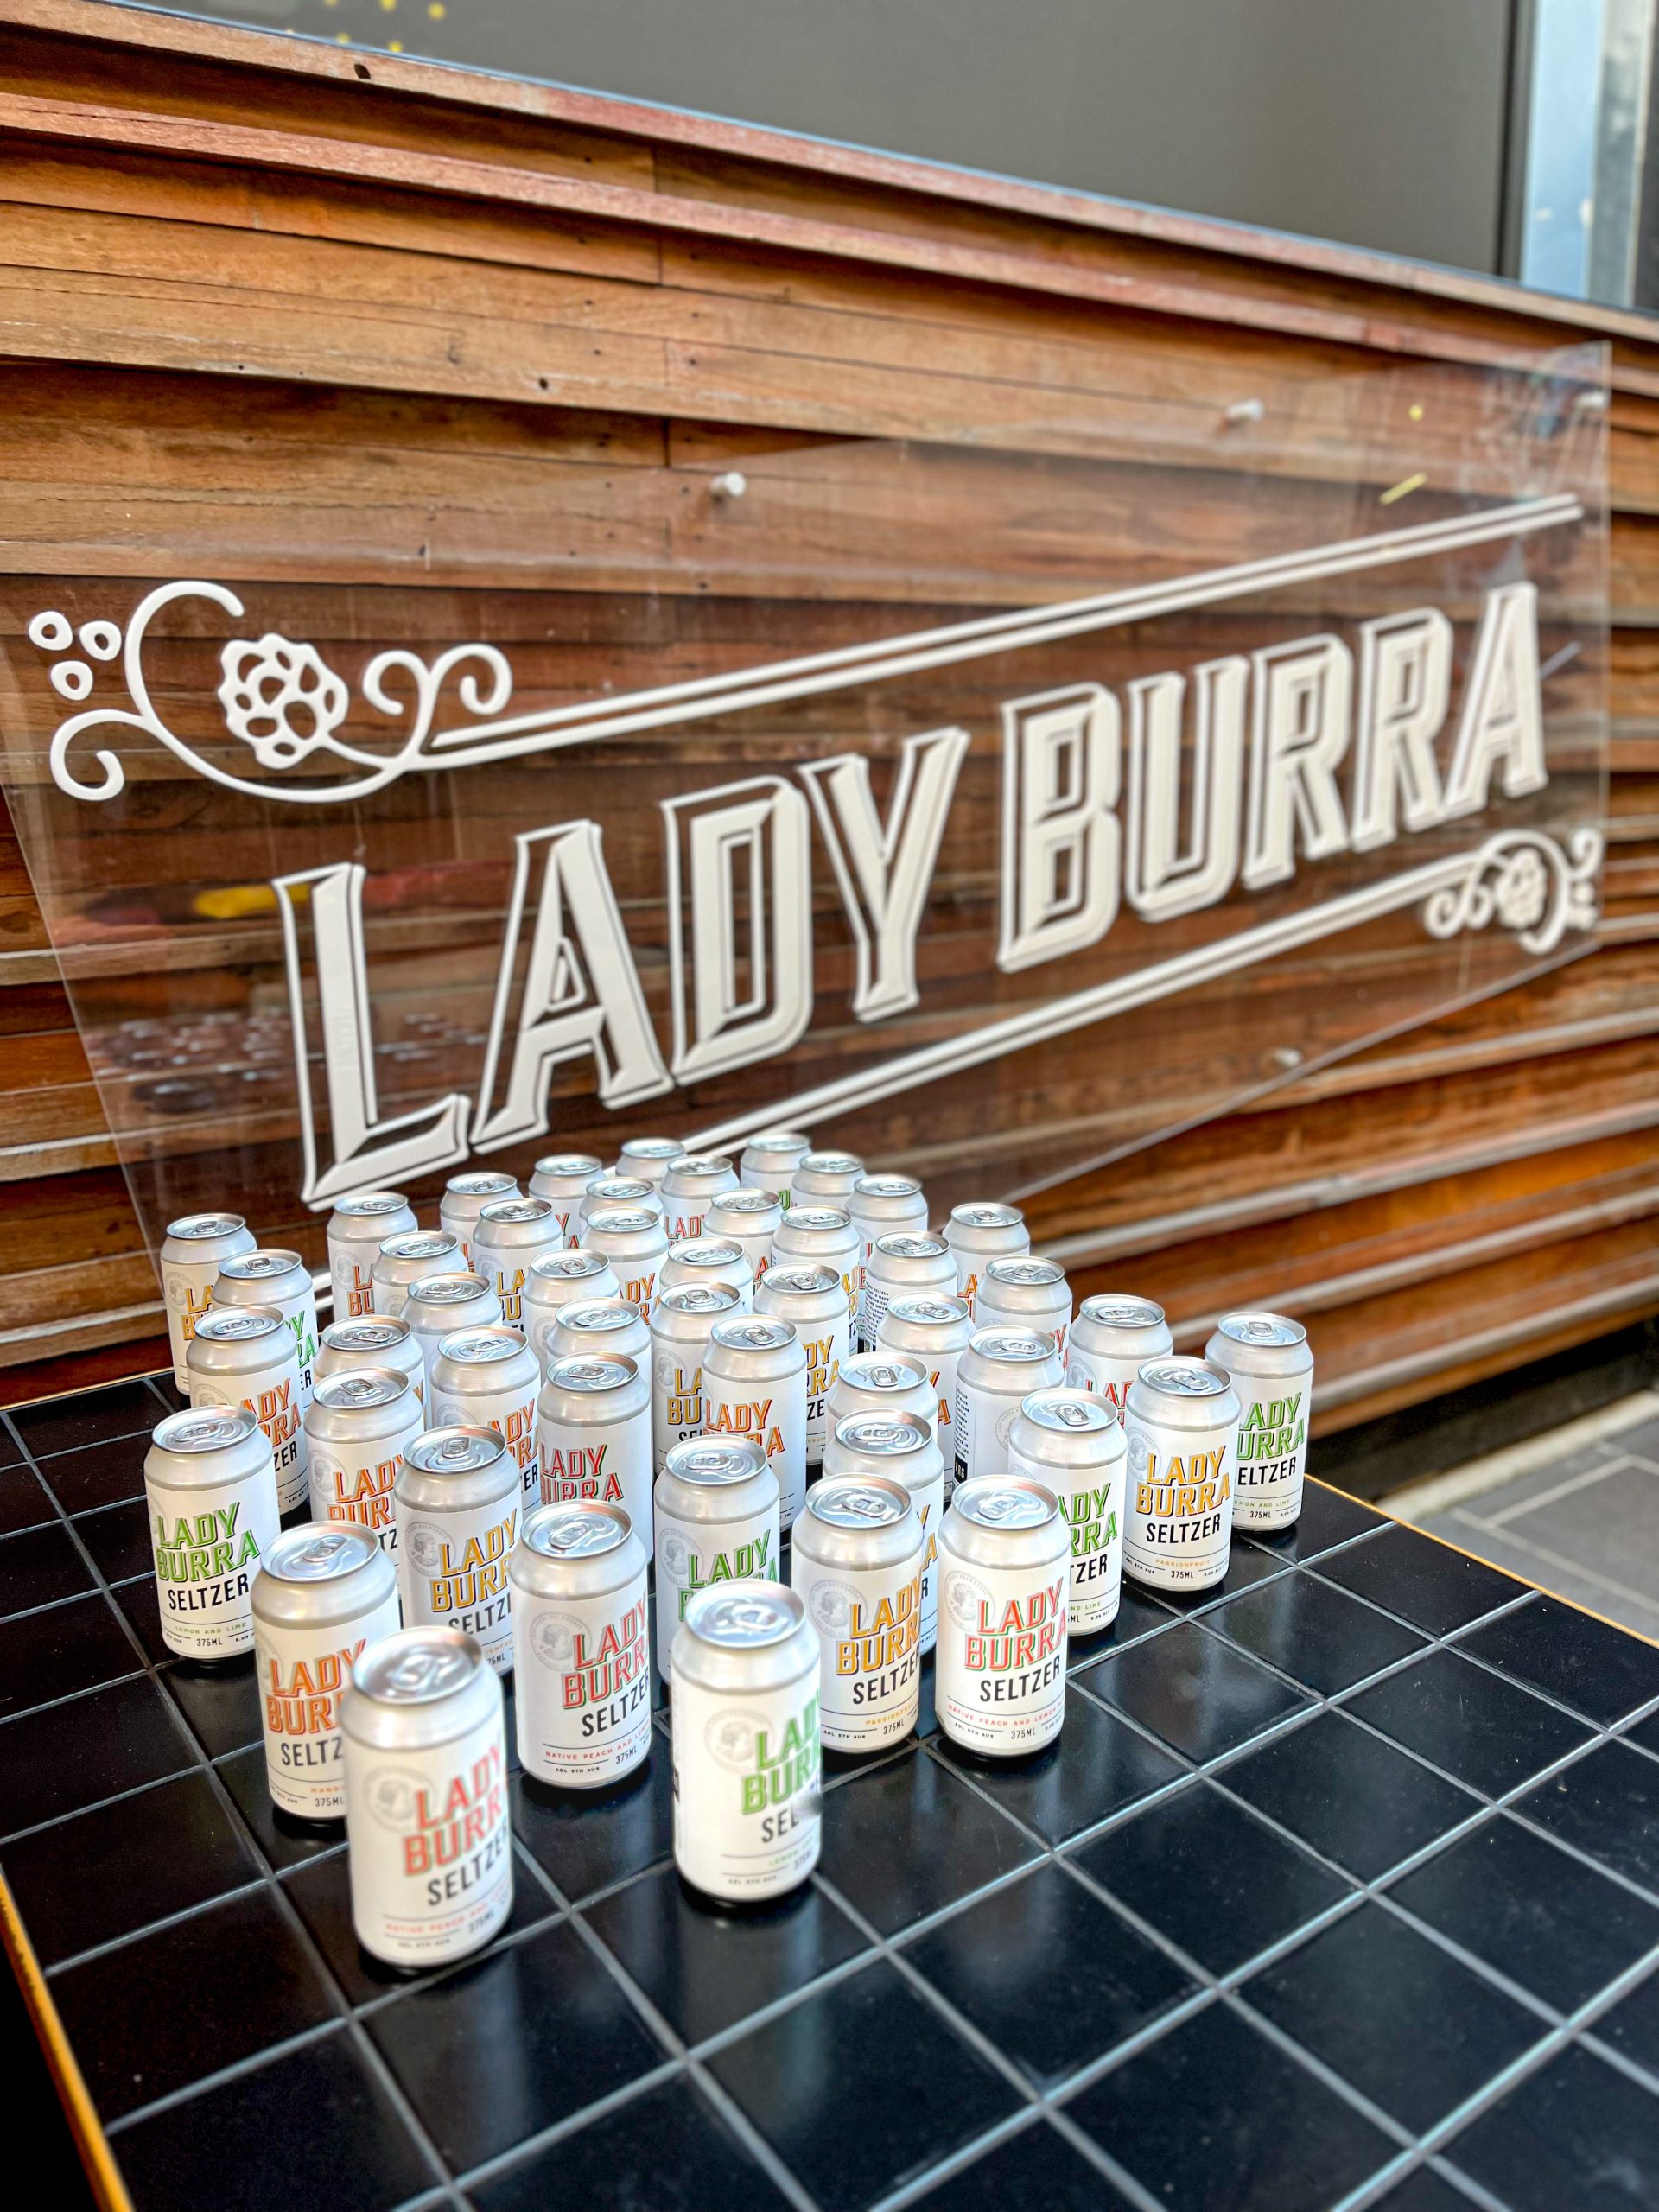 WIN dinner for two people at Lady Burra plus two mixed cartons of their new seltzers!